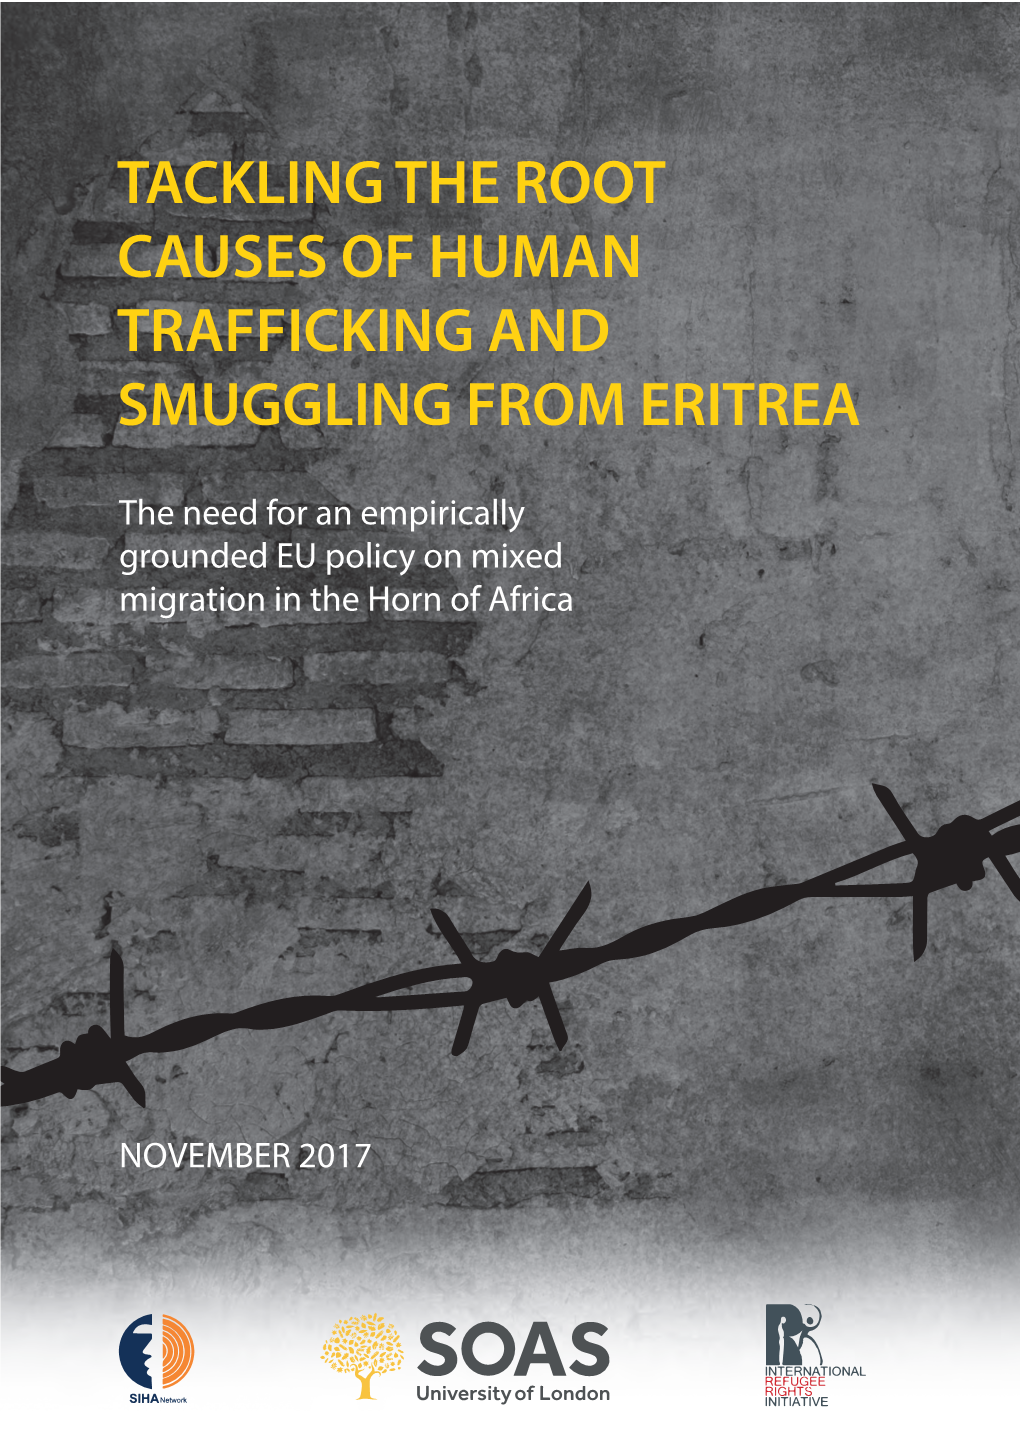 Tackling the Root Causes of Human Trafficking and Smuggling from Eritrea